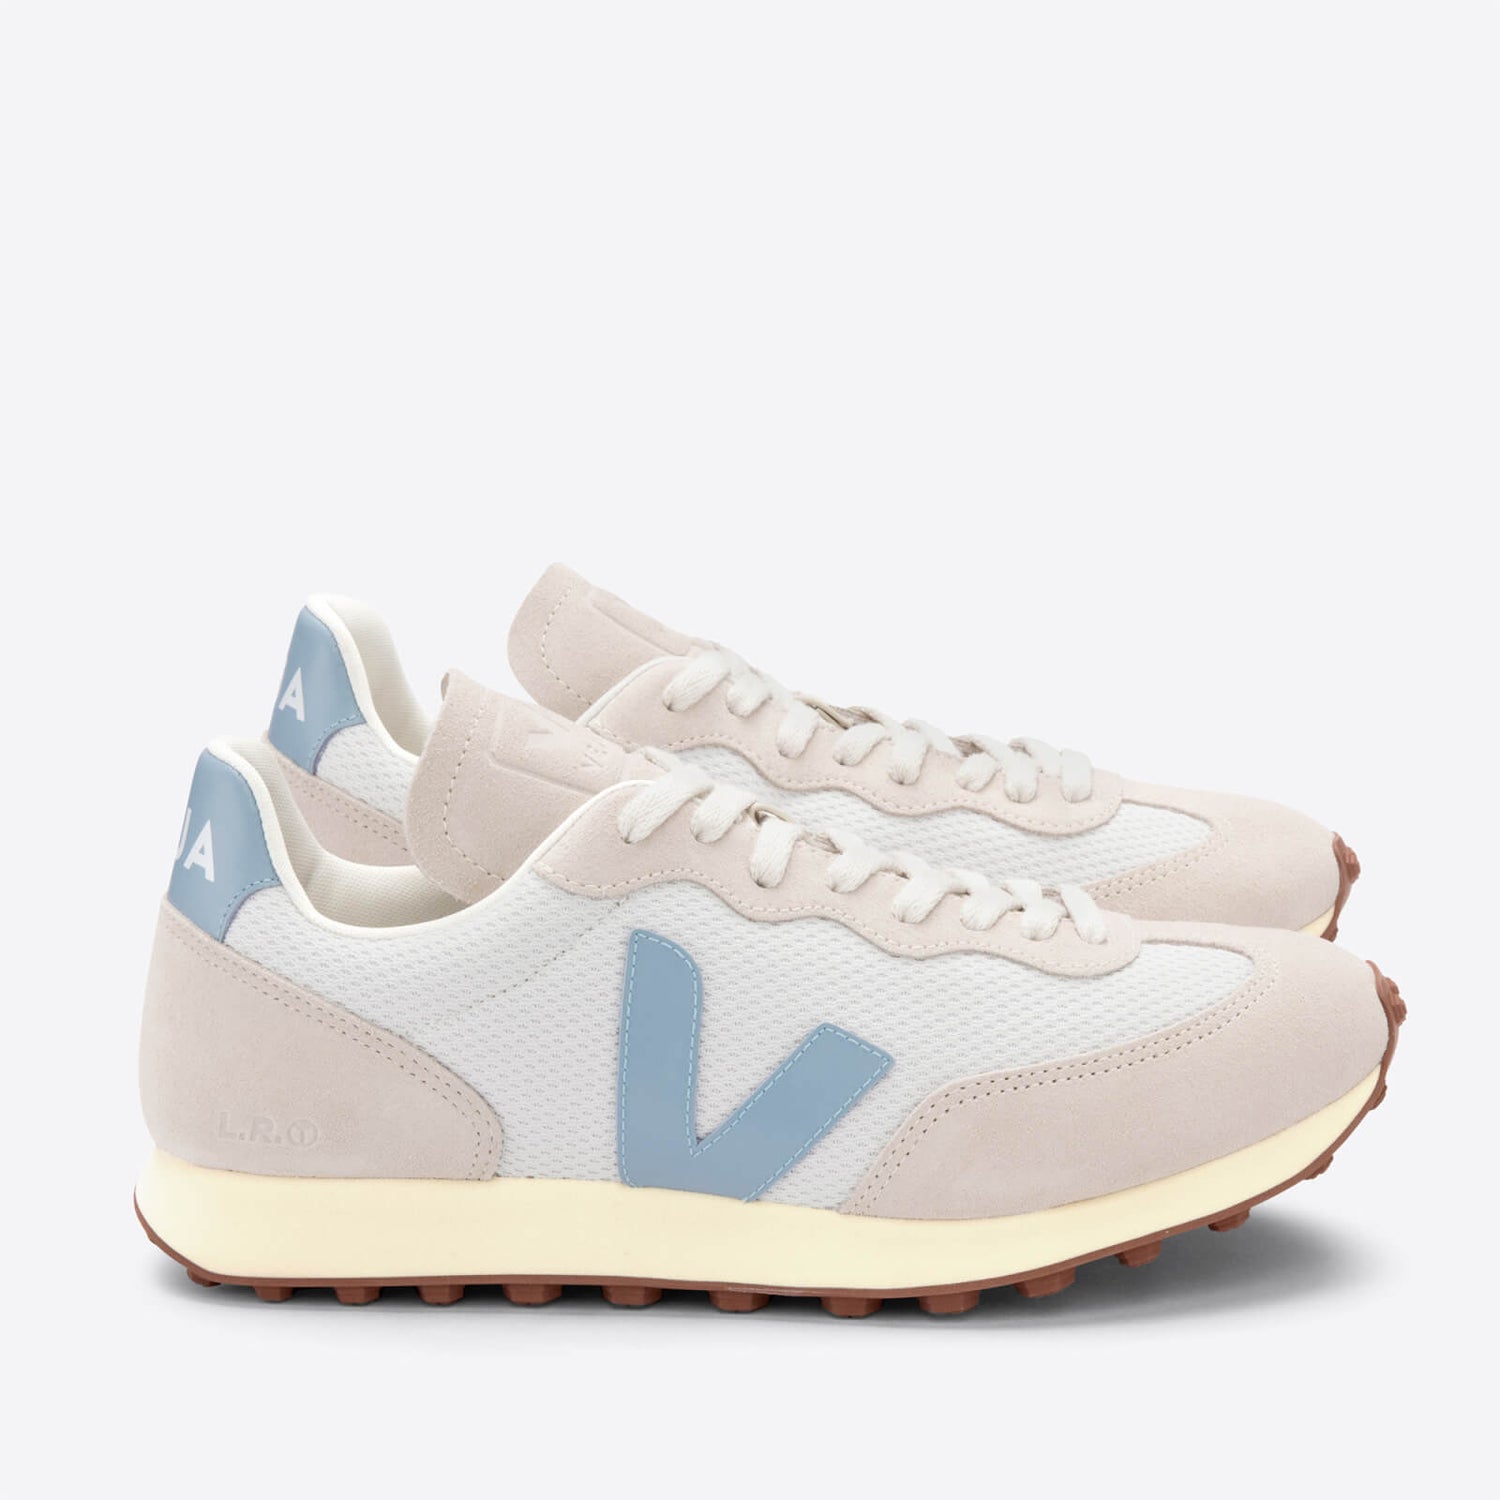 Veja Rio Branco Suede and Leather-Trimmed Alveomesh Trainers